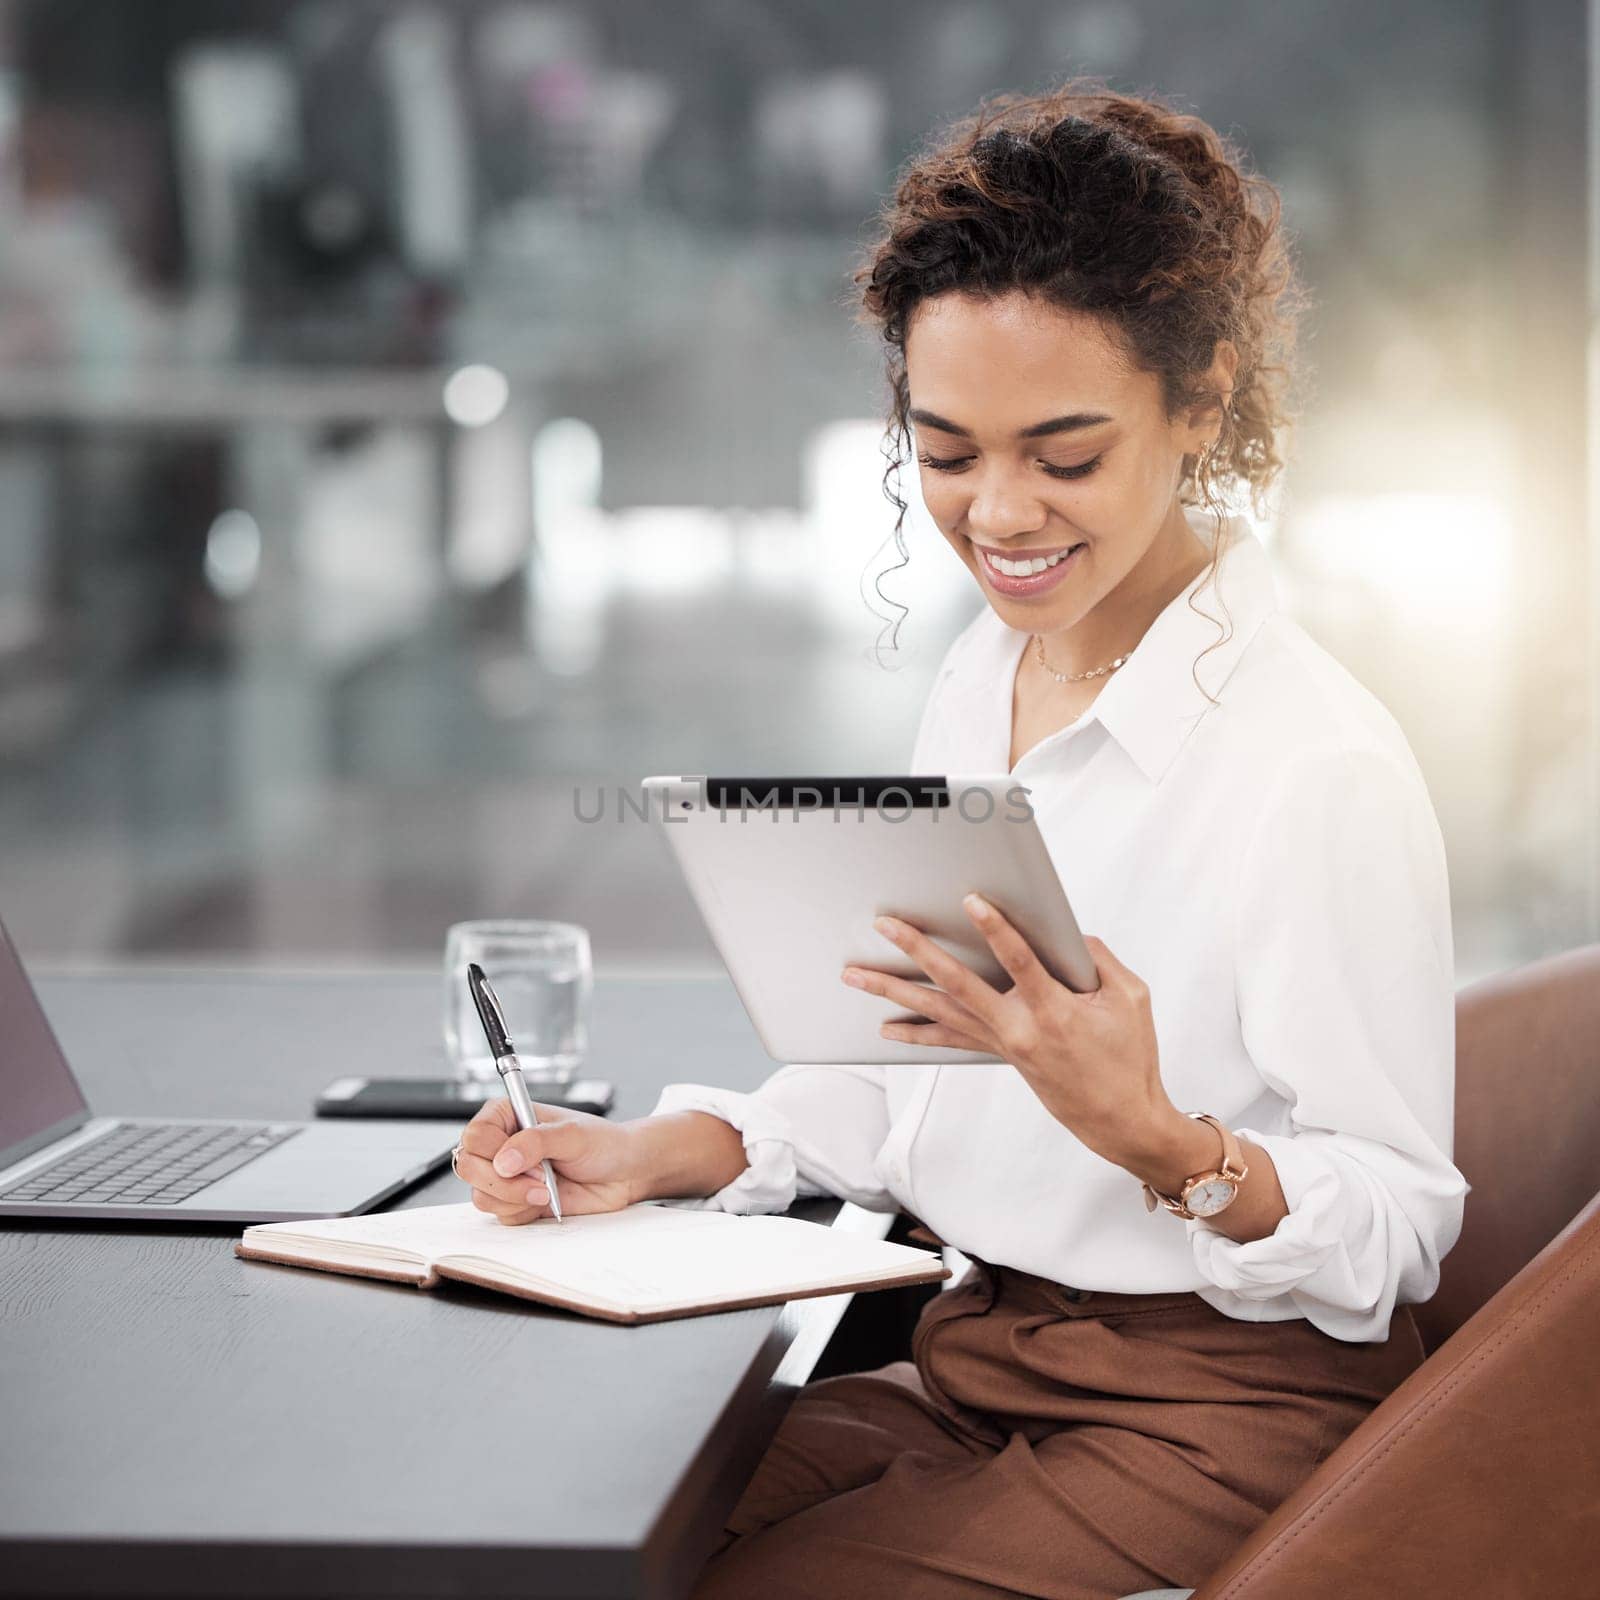 Tablet, business woman and accountant taking notes, smile and working on project. Technology, notebook and African female entrepreneur, auditor or person research for accounting, email and writing